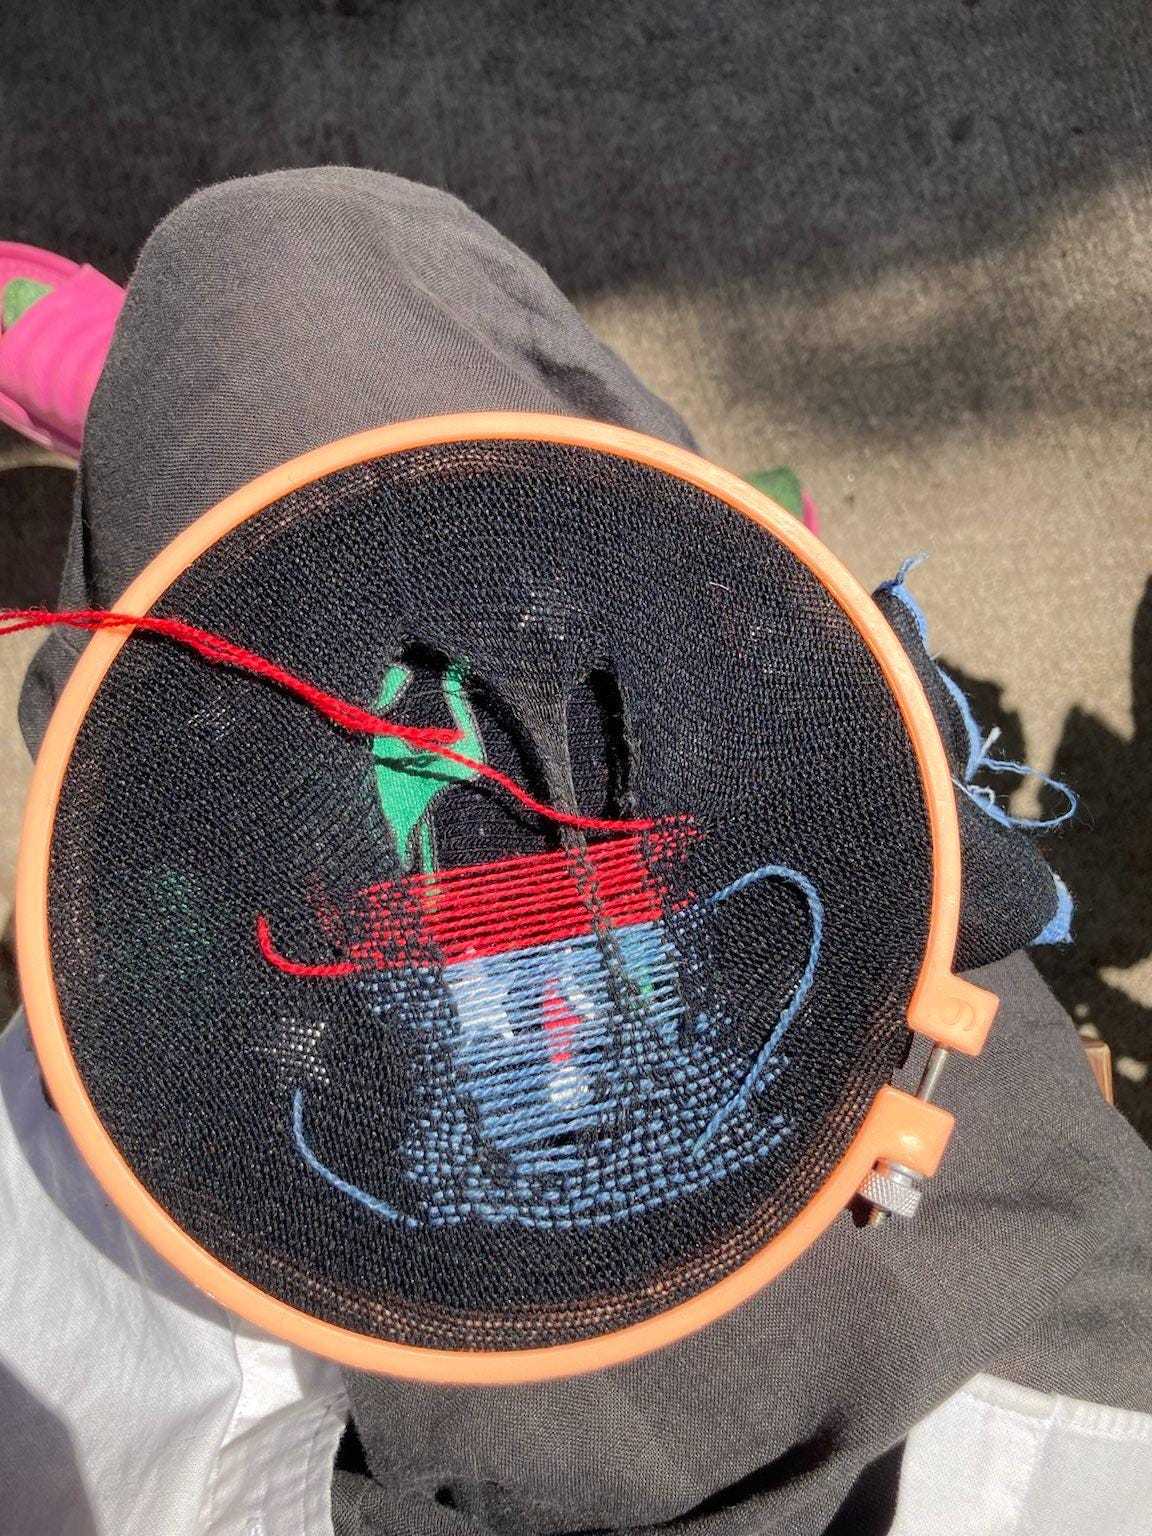 An orange embroidery hoop sits on Khanh's leg, with a sock on it with 2 big holes. Red and blue yarn are threaded through the sock horizontally